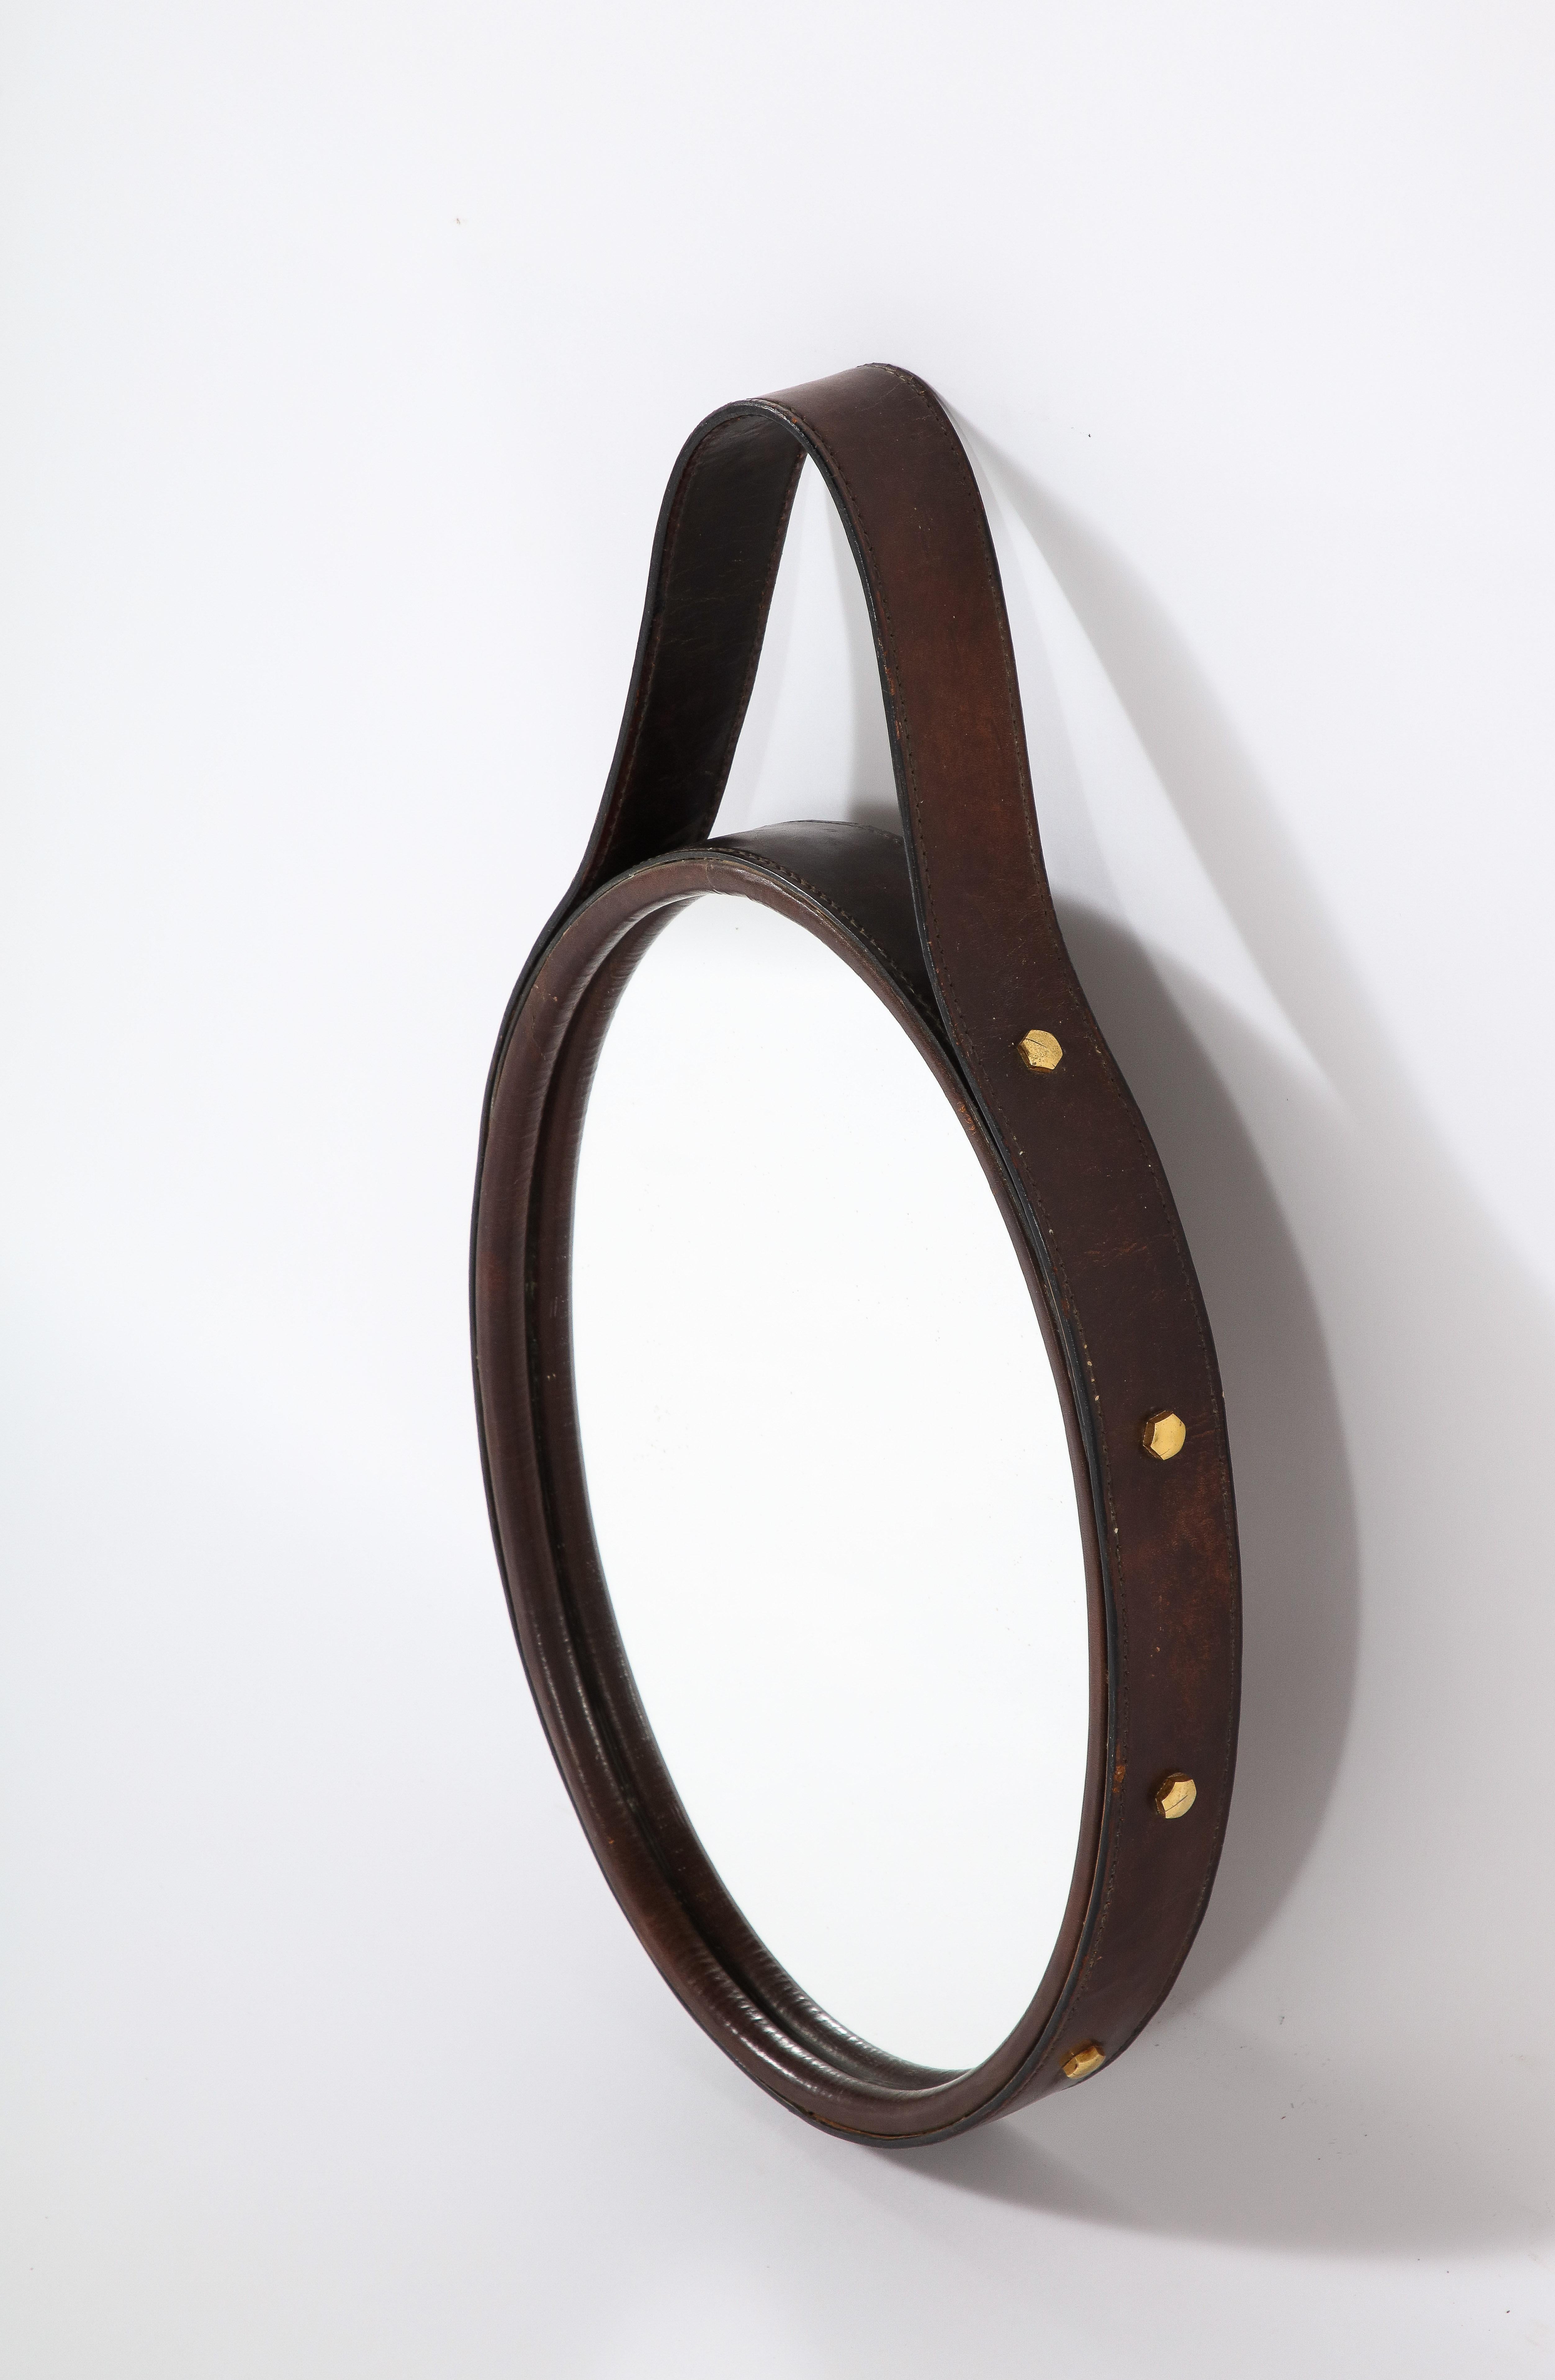 Florentine Leather Wrapped Oval Mirror, Italy, 1960's For Sale 1